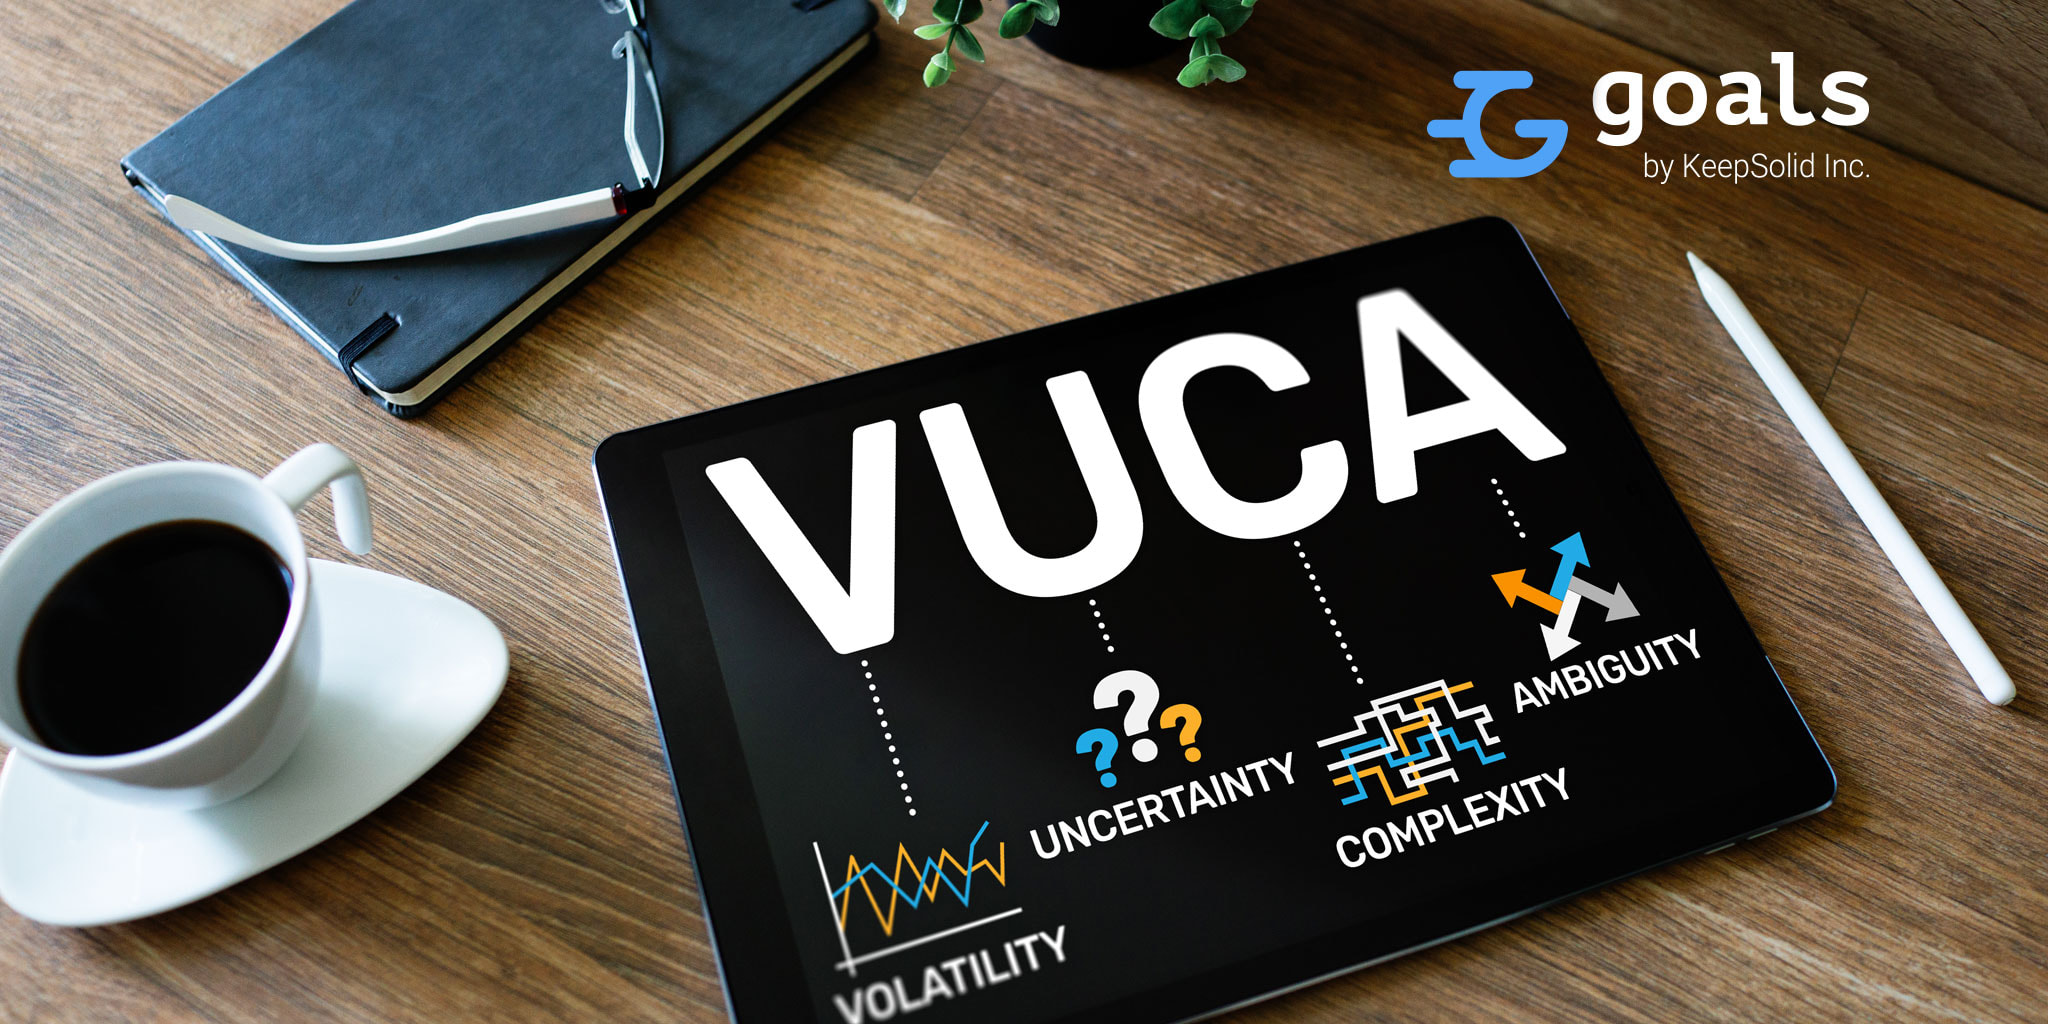 VUCA world concept on screen - volatility, uncertainty, complexity, ambiguity